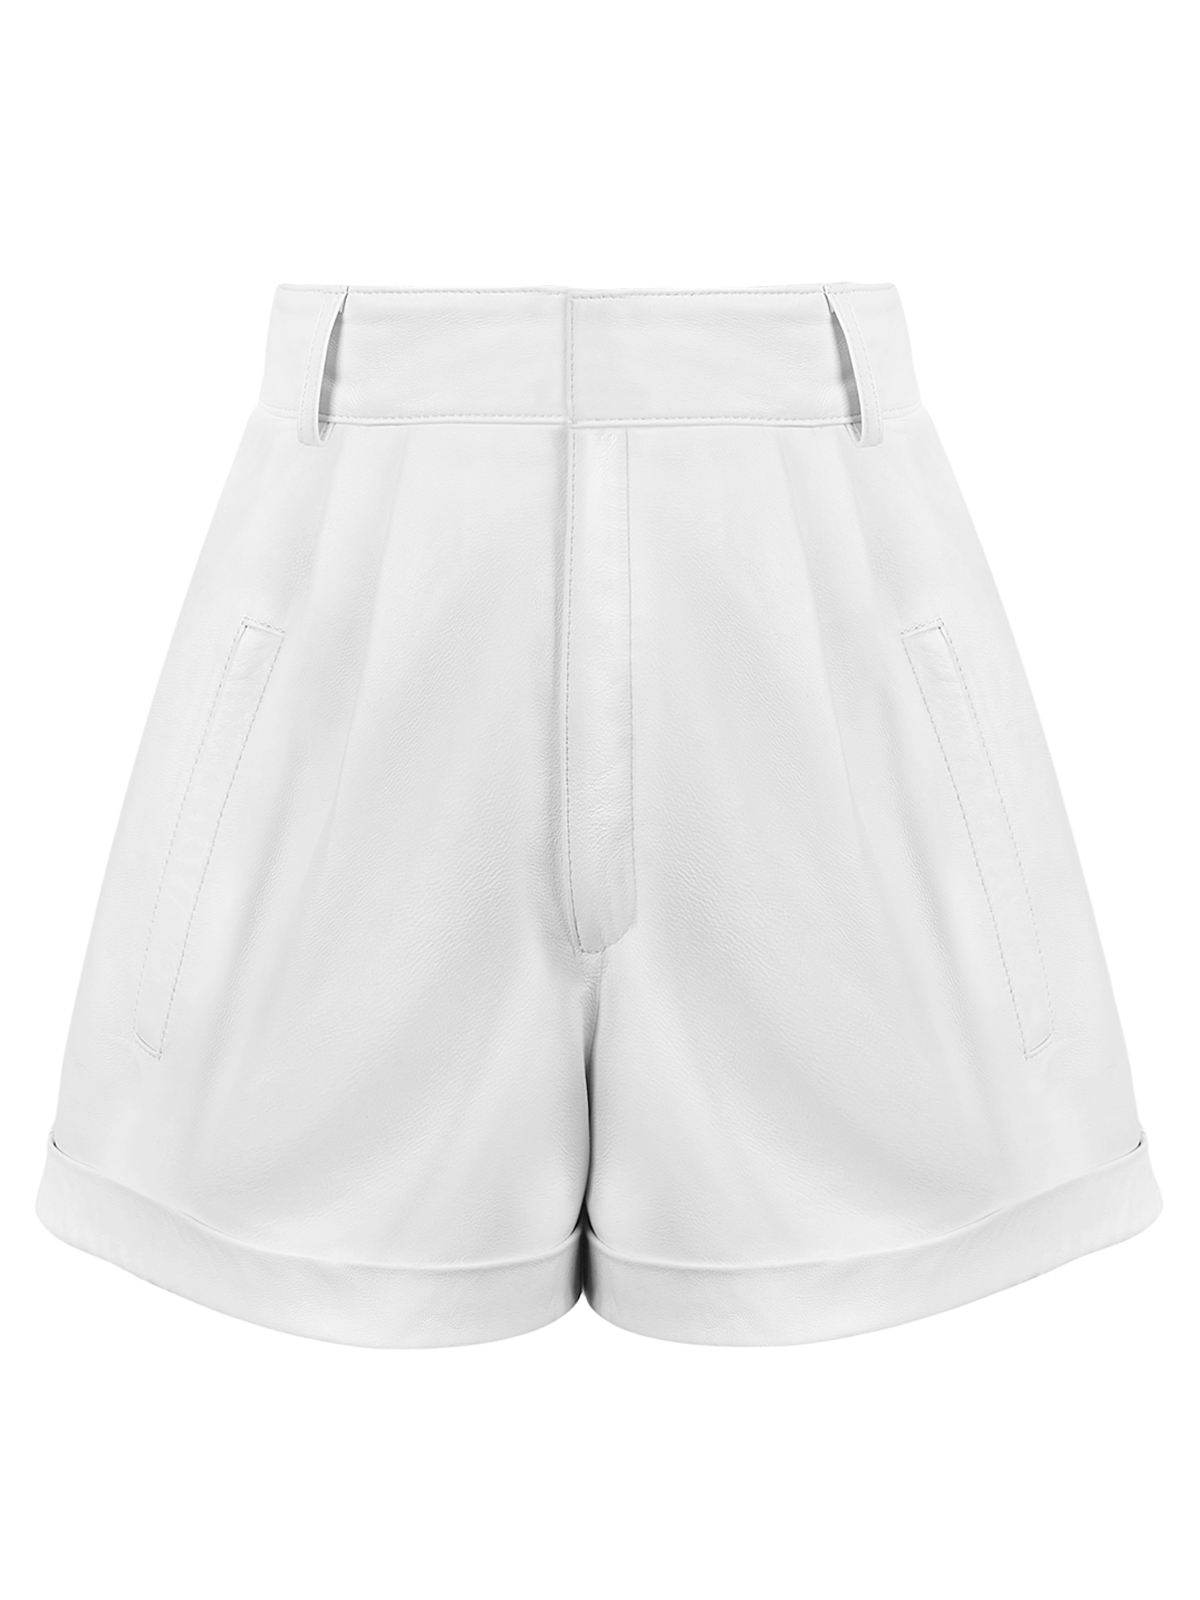 SHORTS : TAYLOR SHORTS (SALE) by www 